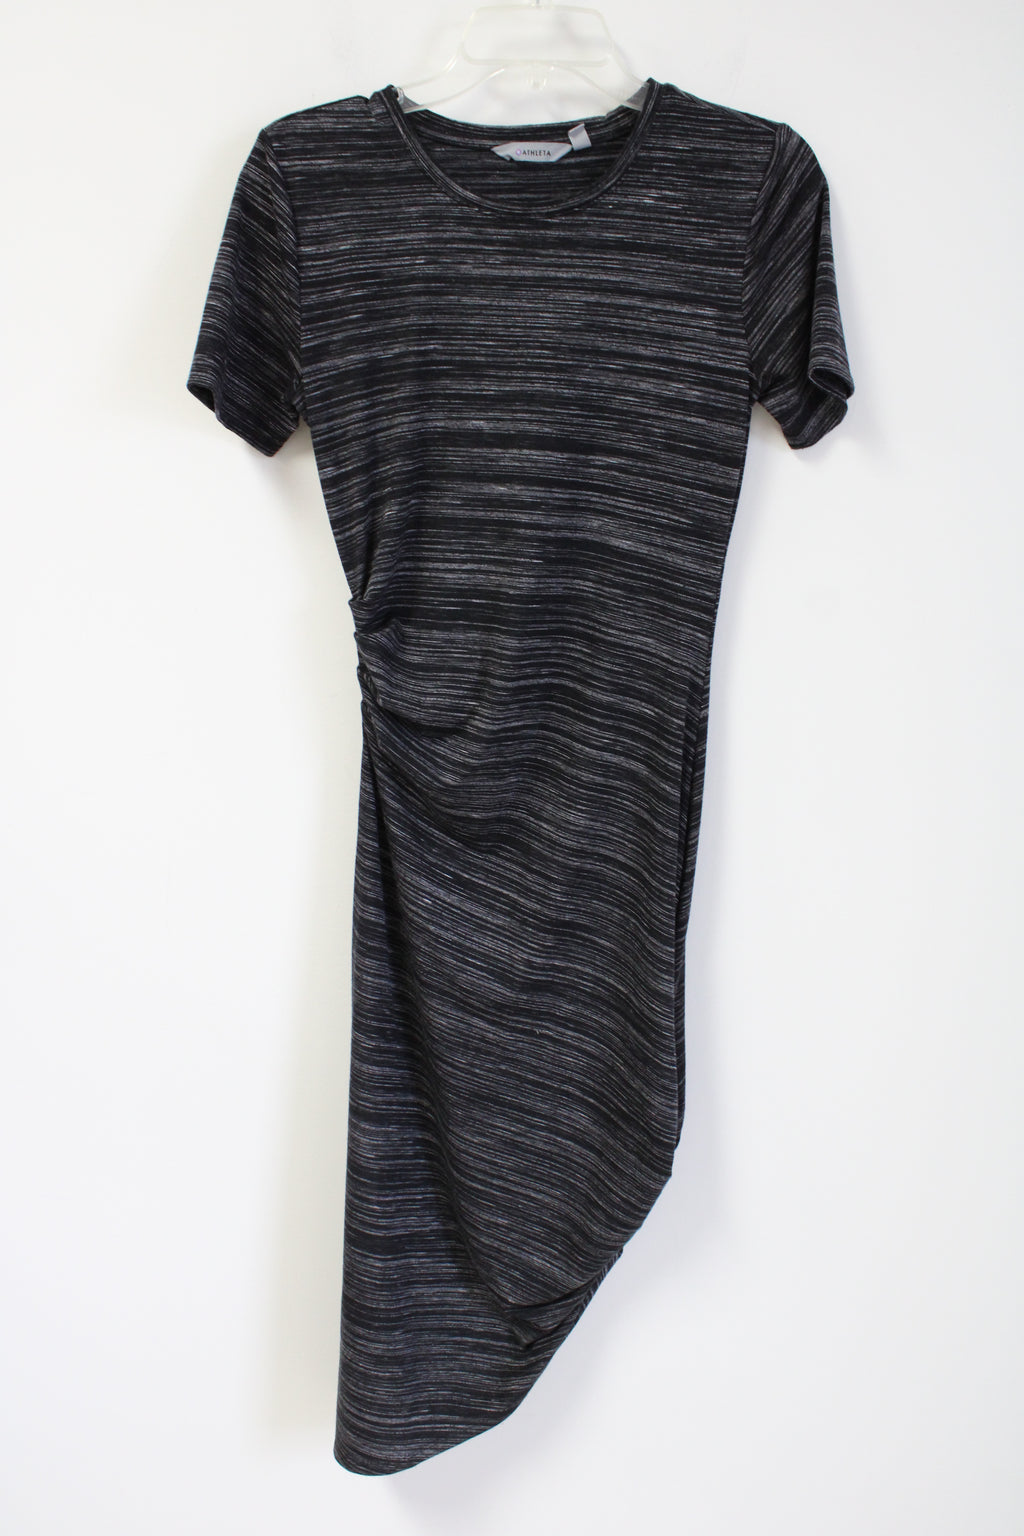 Athleta Ruched Downtown Gray Heathered Asymmetrical Dress | XS